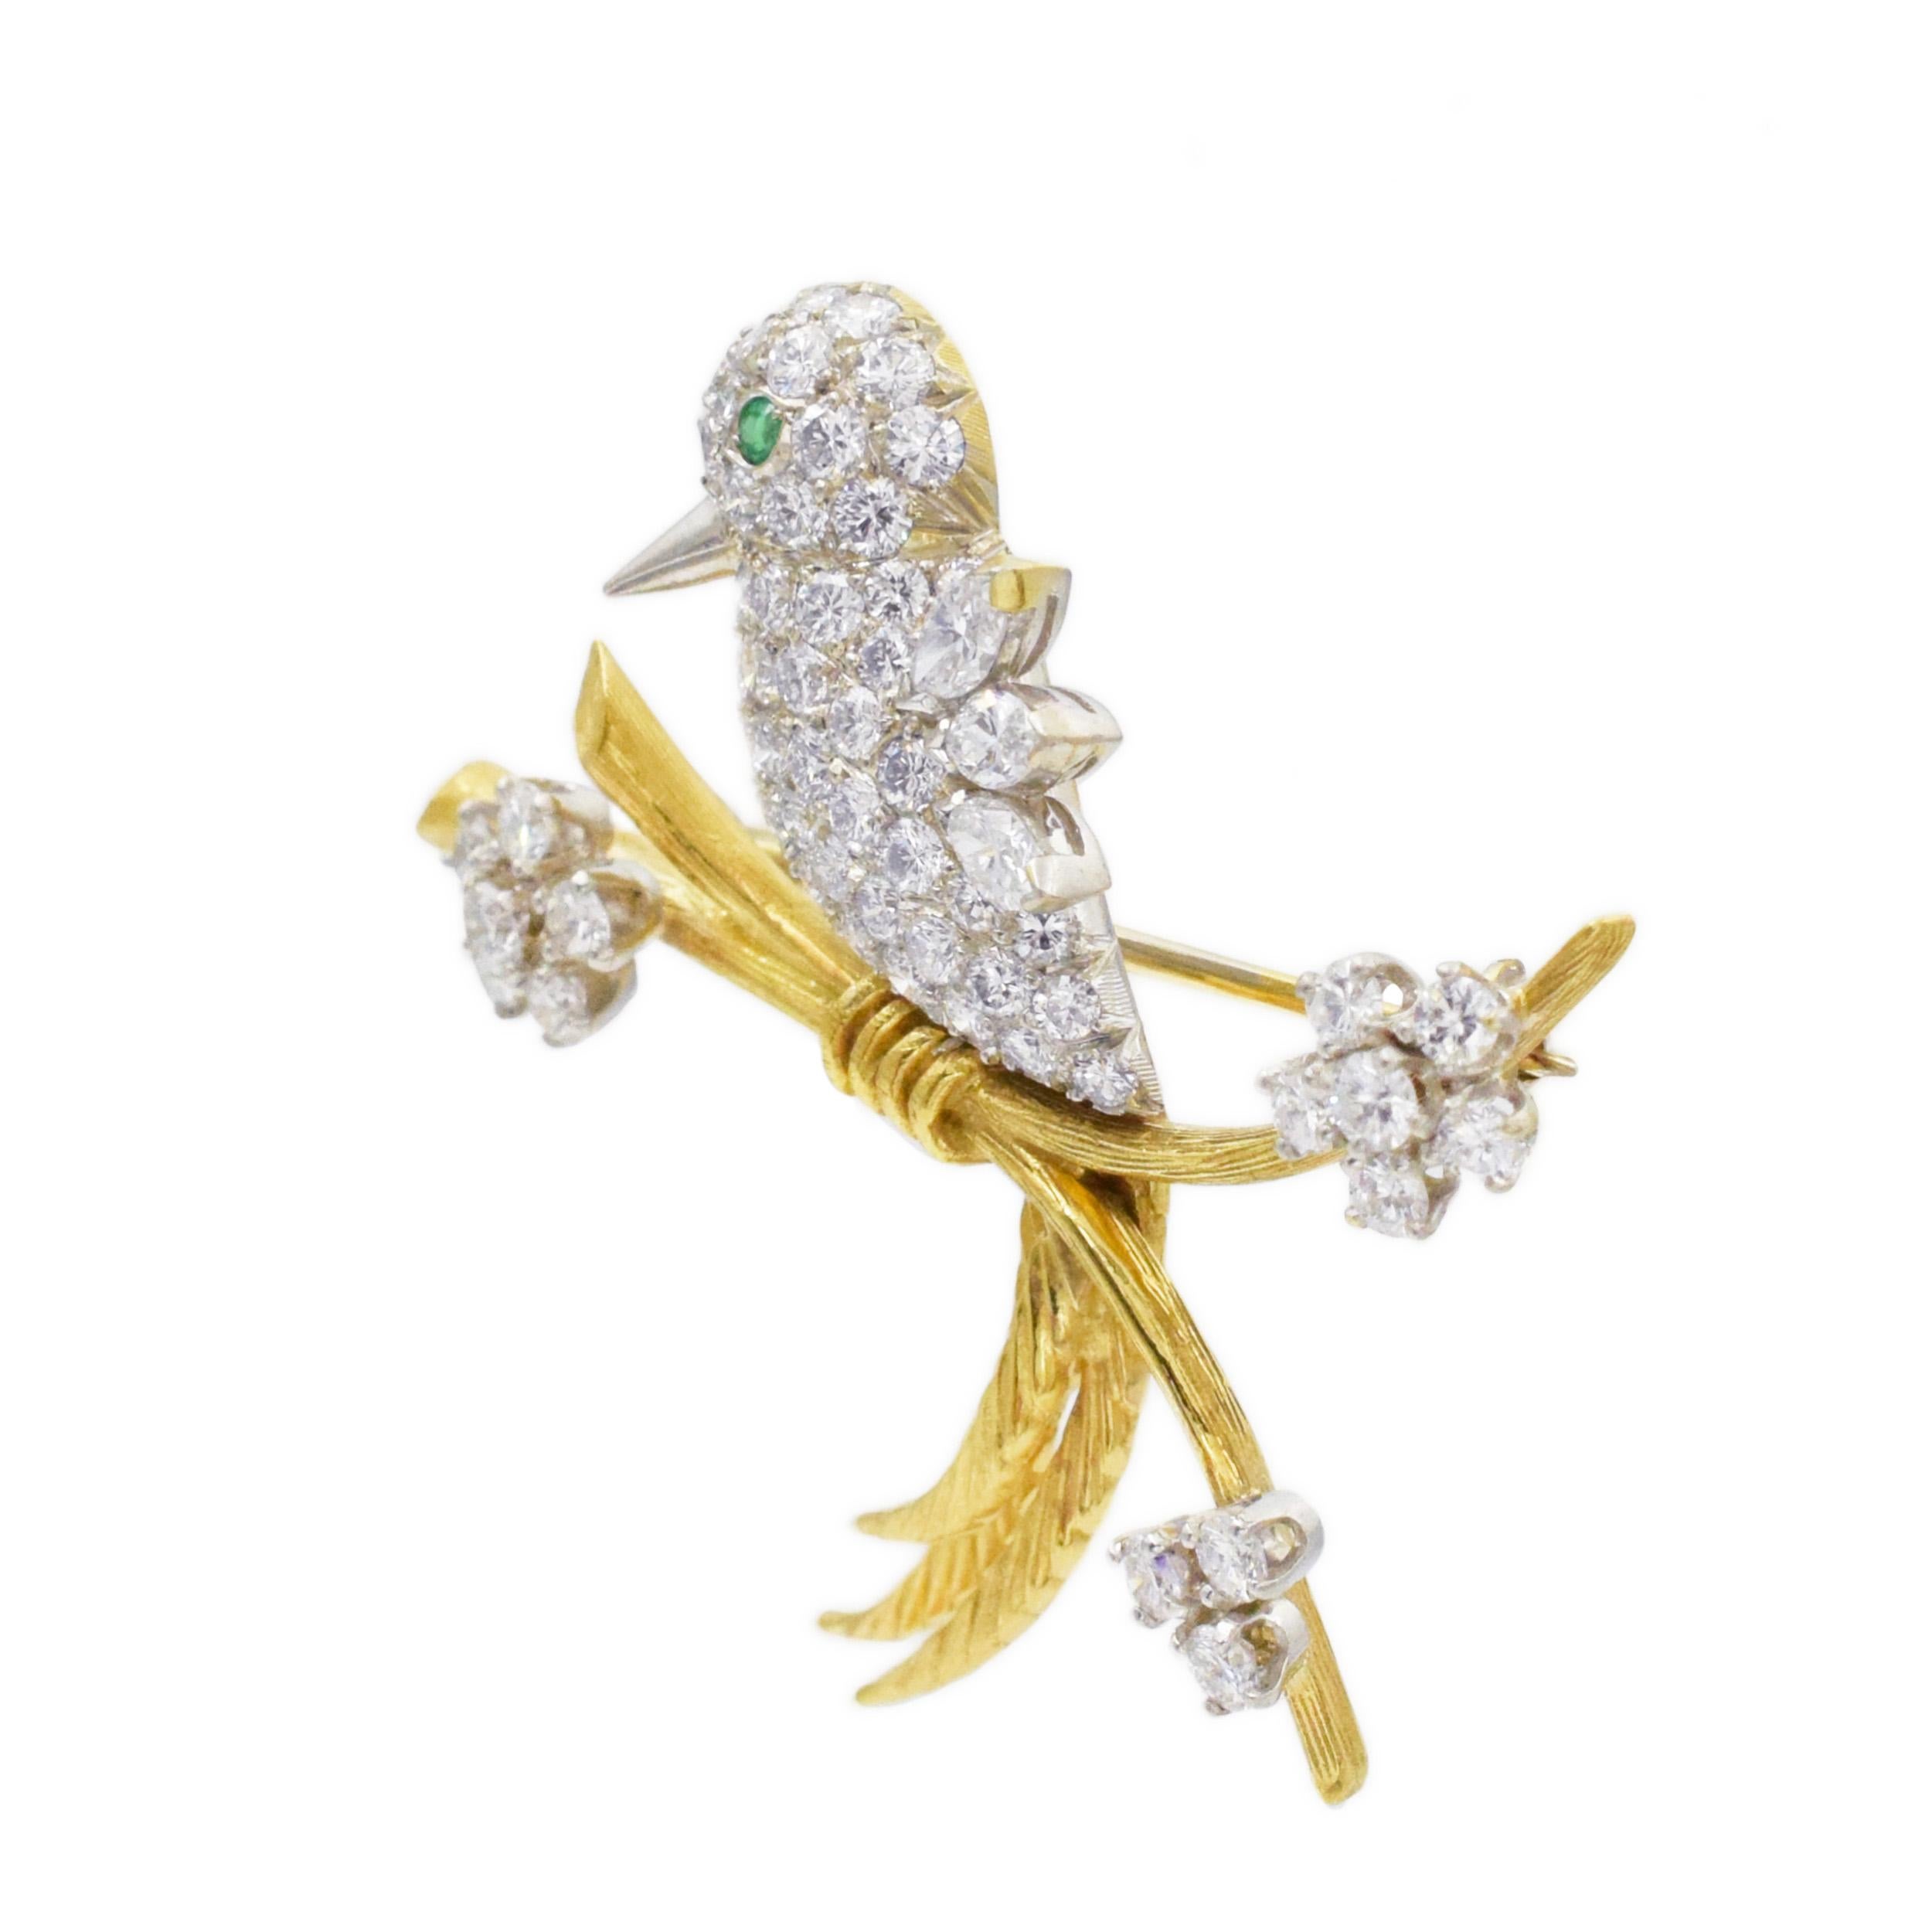 Tiffany Schlumberger diamond and emeradl bird on a branch brooch in 18k yellow gold and platinum.
The bird is made in platinum, body fully encrusted with round brilliant cut diamonds, wings made of three marquise cut diamonds and round cut emerald